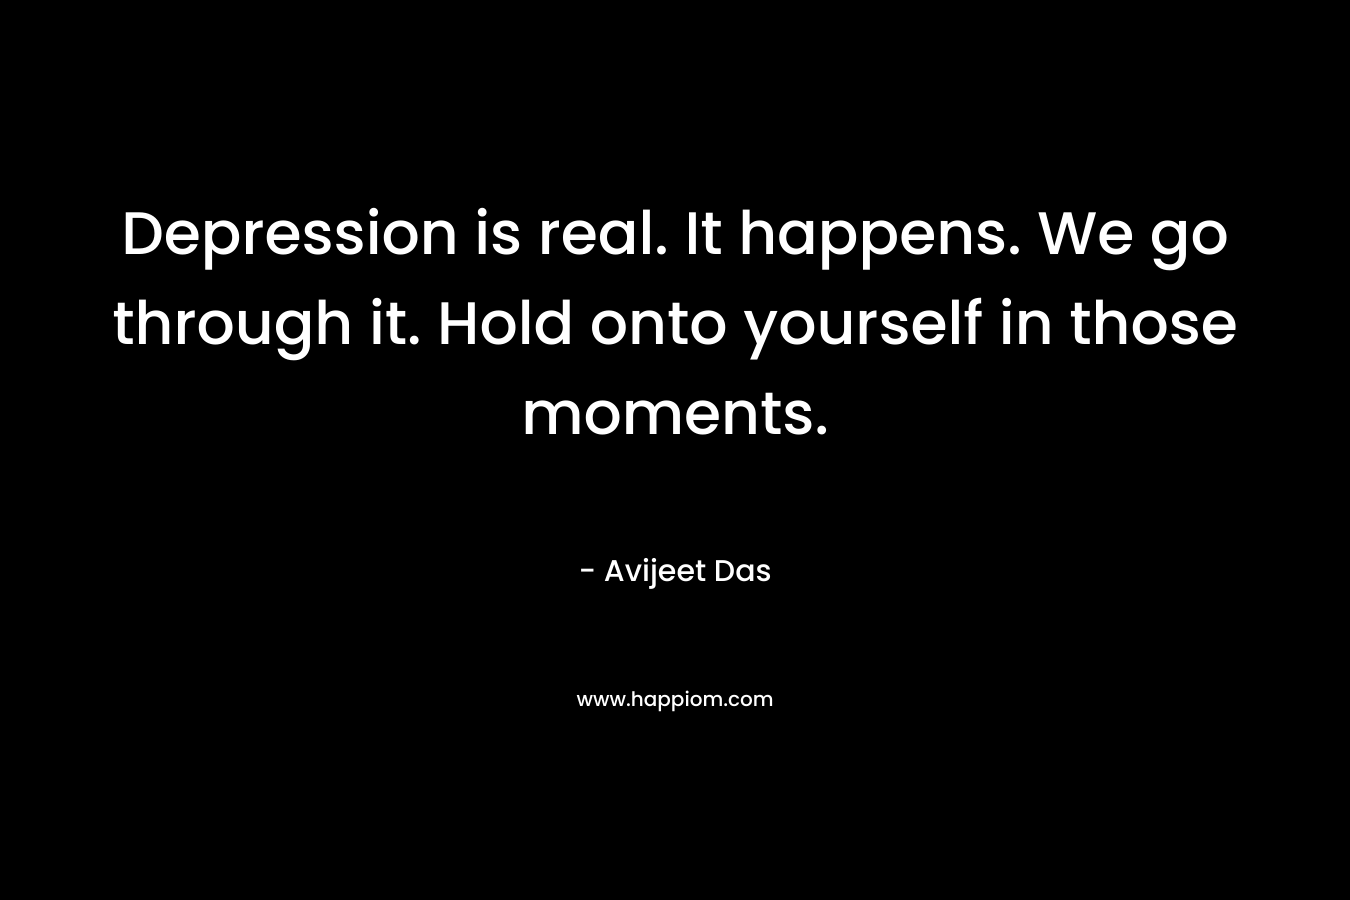 Depression is real. It happens. We go through it. Hold onto yourself in those moments. – Avijeet Das